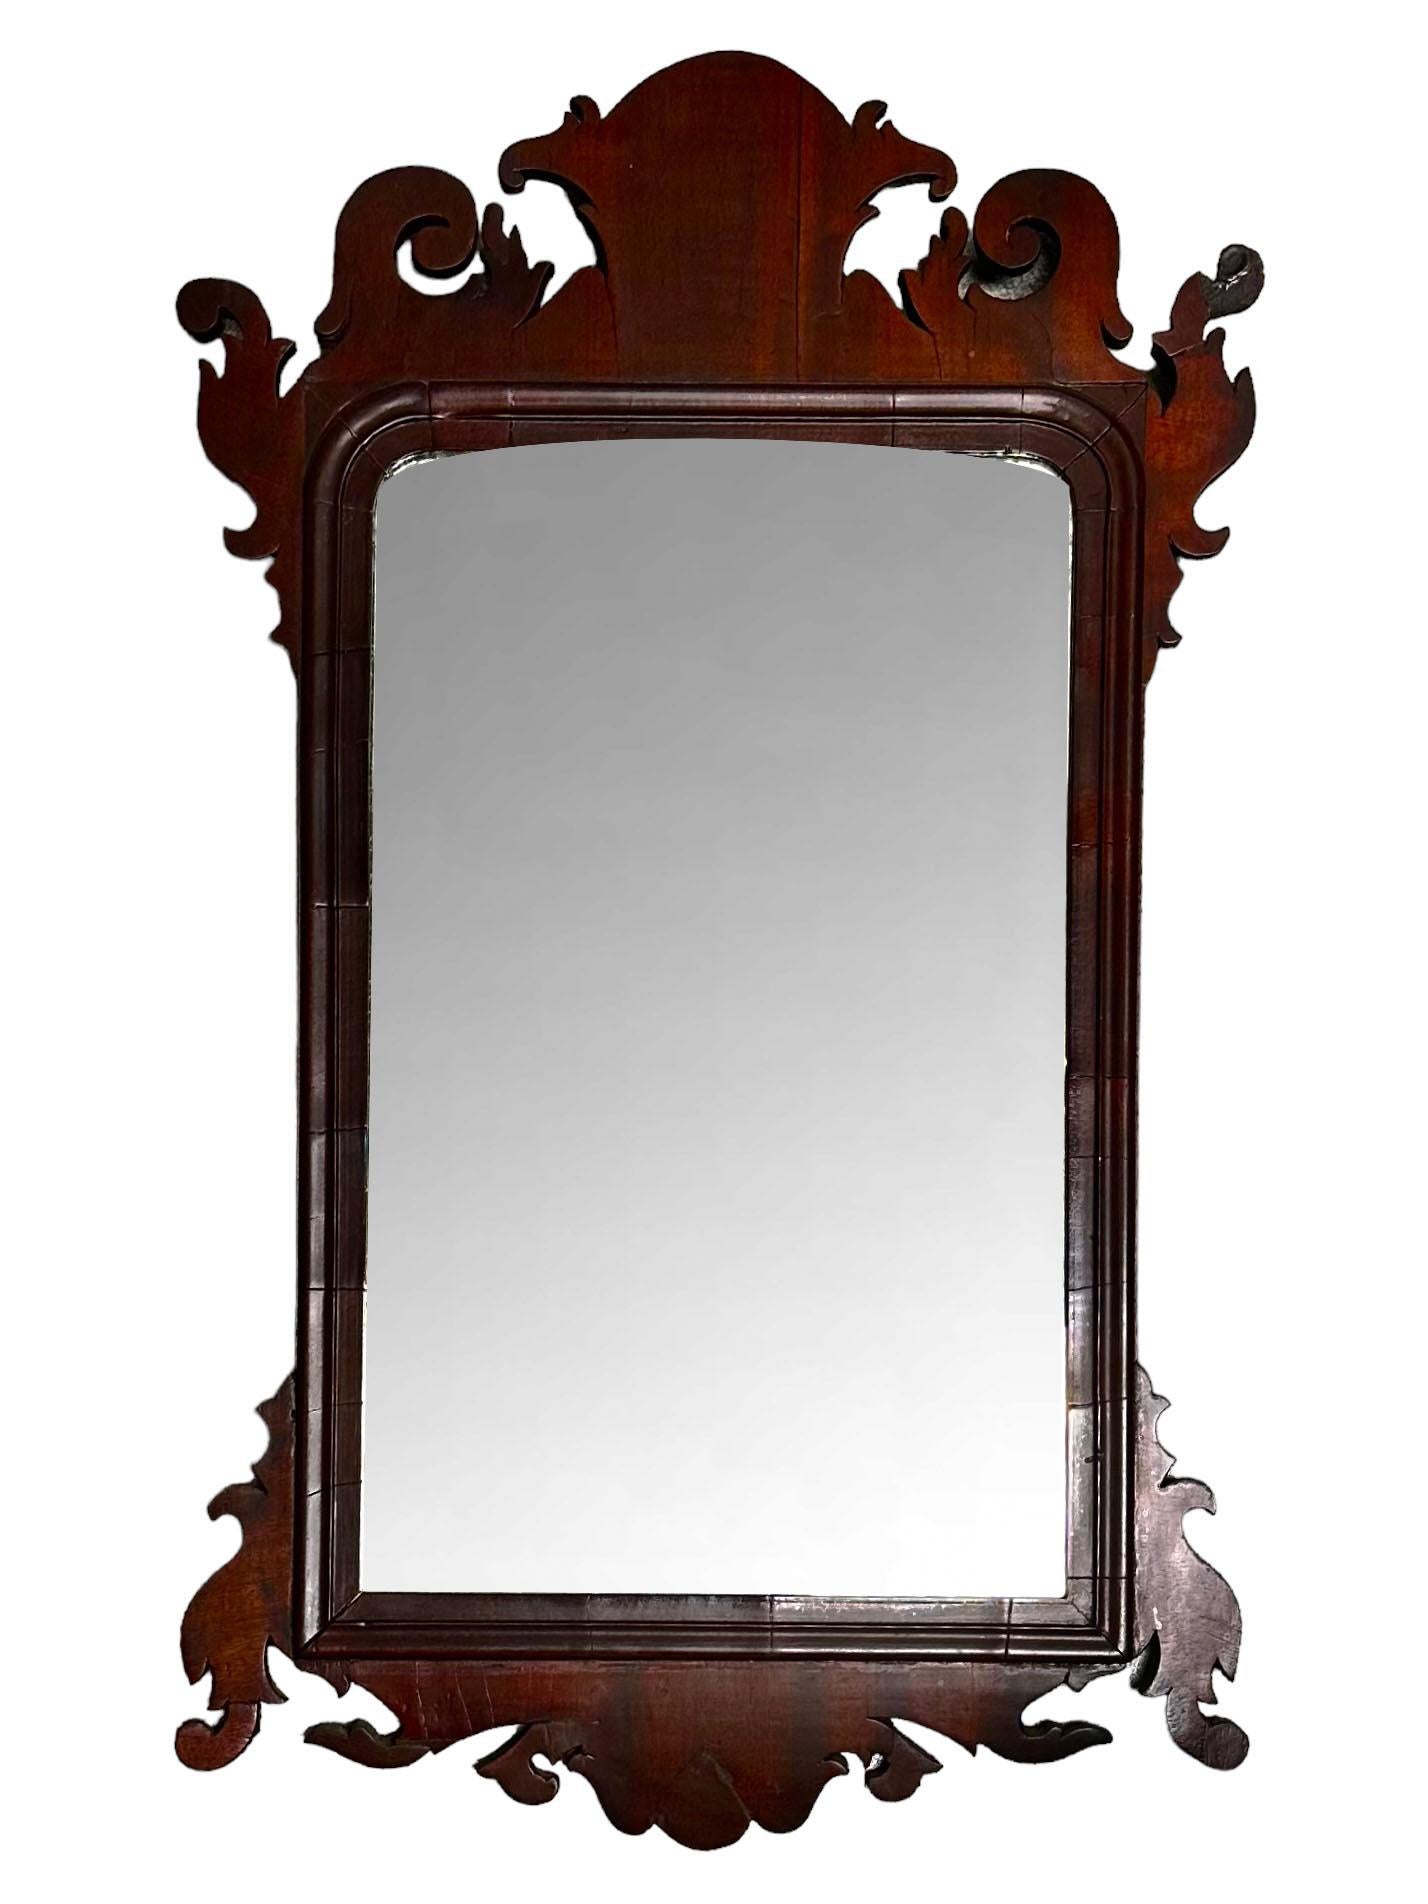 A late 18th century American wooden mirror with its original glass. The back and everything looks original. Only some of the nails have been replaced to hold the back. American.